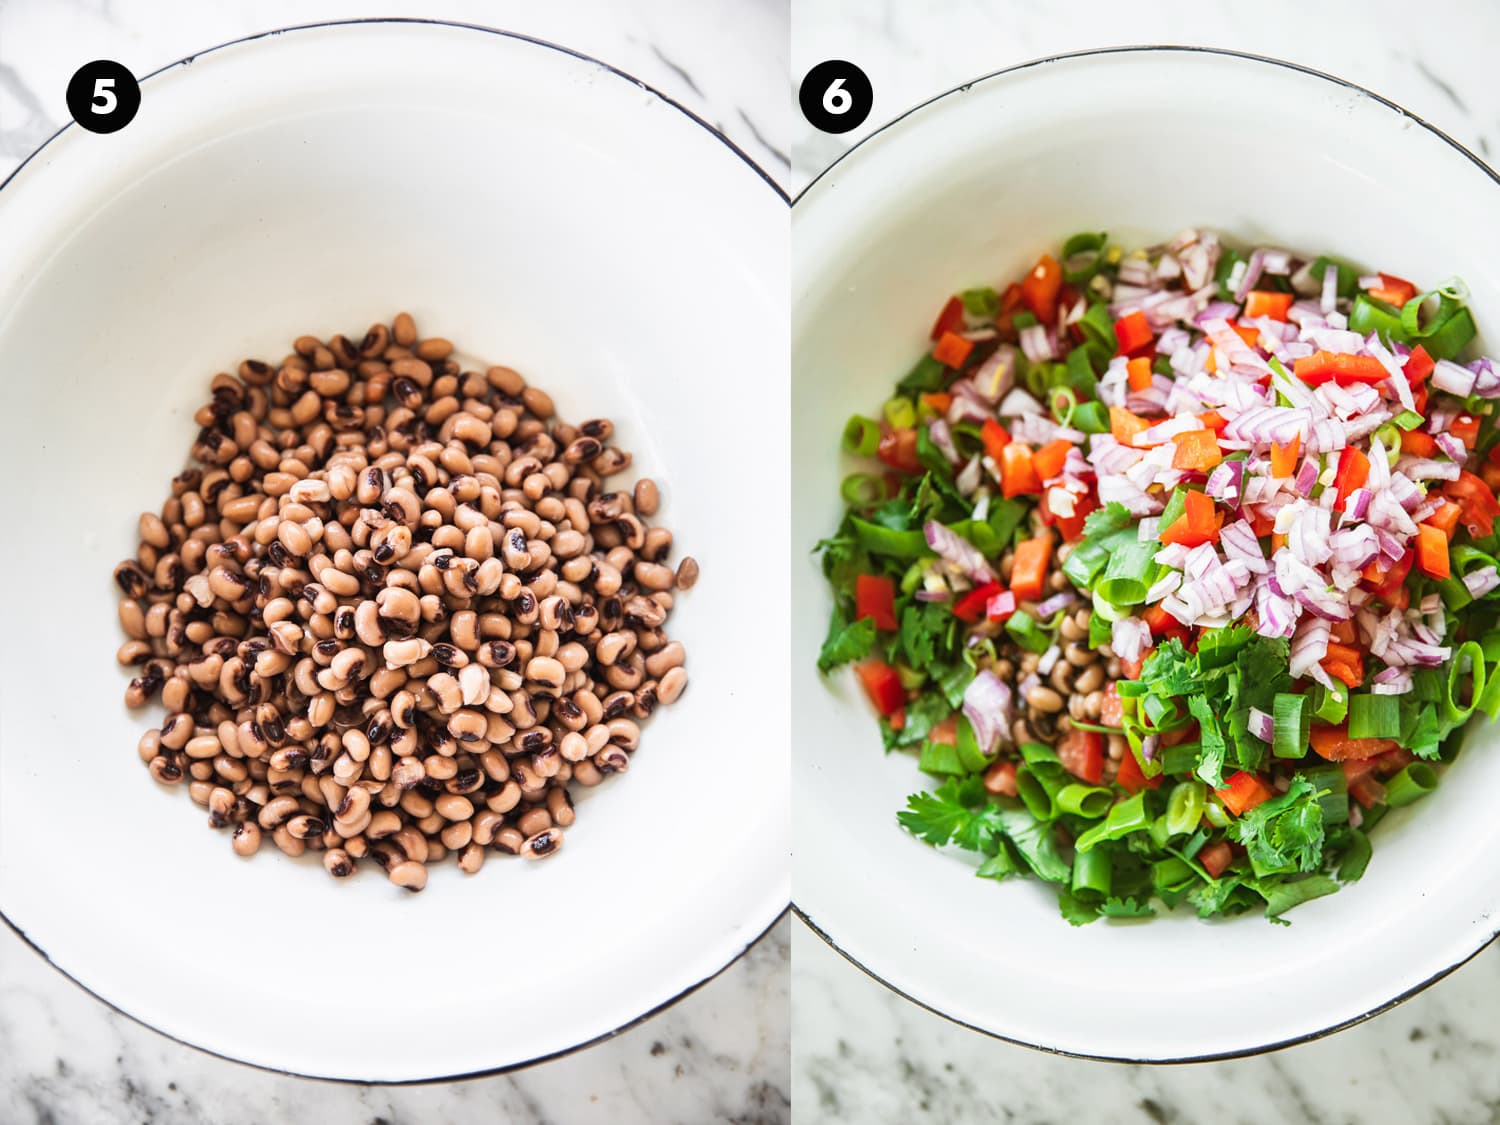 Mix cooked black eyed peas and chopped veggies and herbs in a bowl to make Texas Caviar Salad